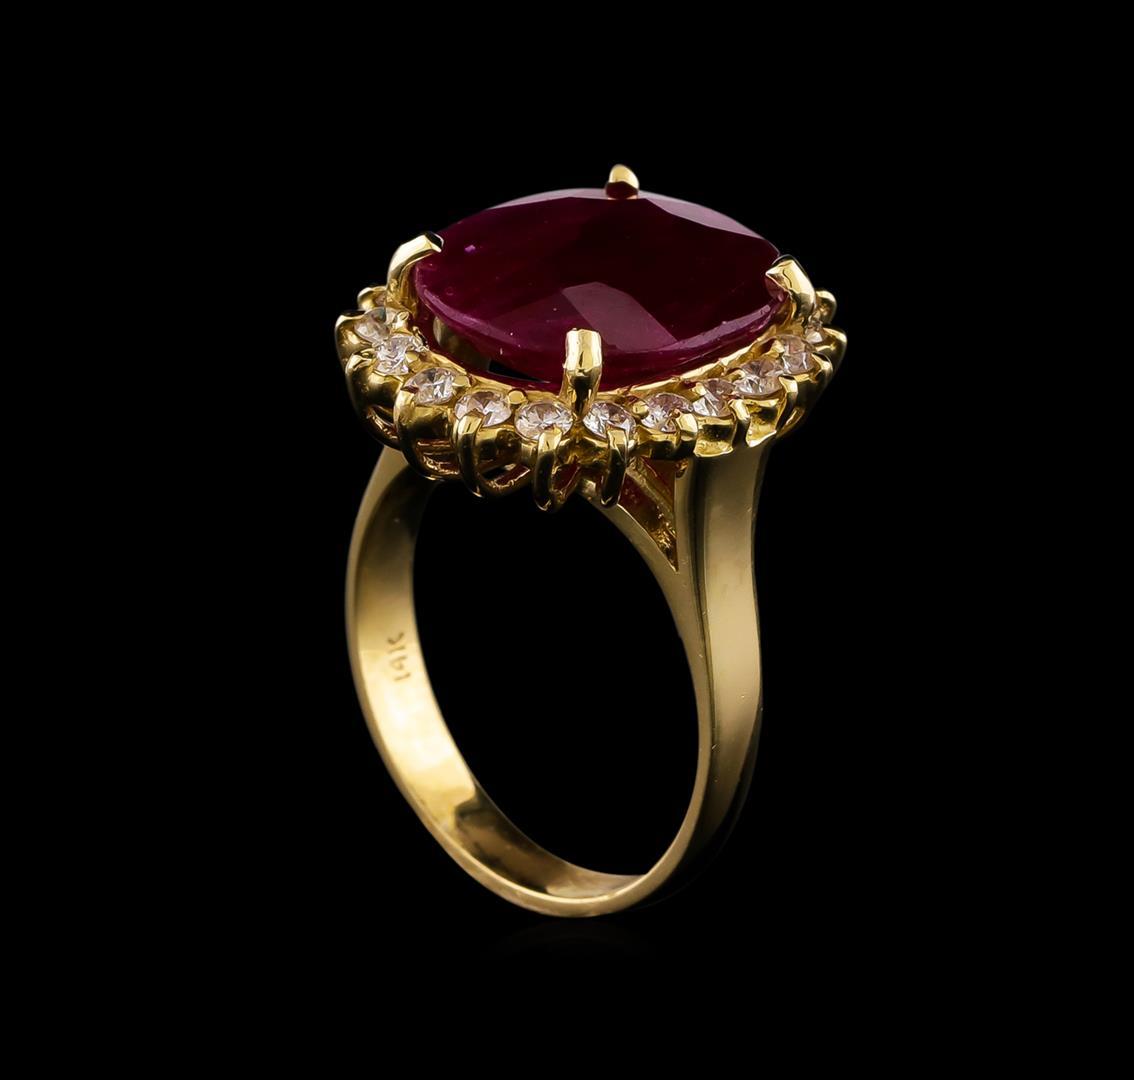 GIA Cert 6.96 ctw Ruby and Diamond Ring - 14KT Yellow Gold